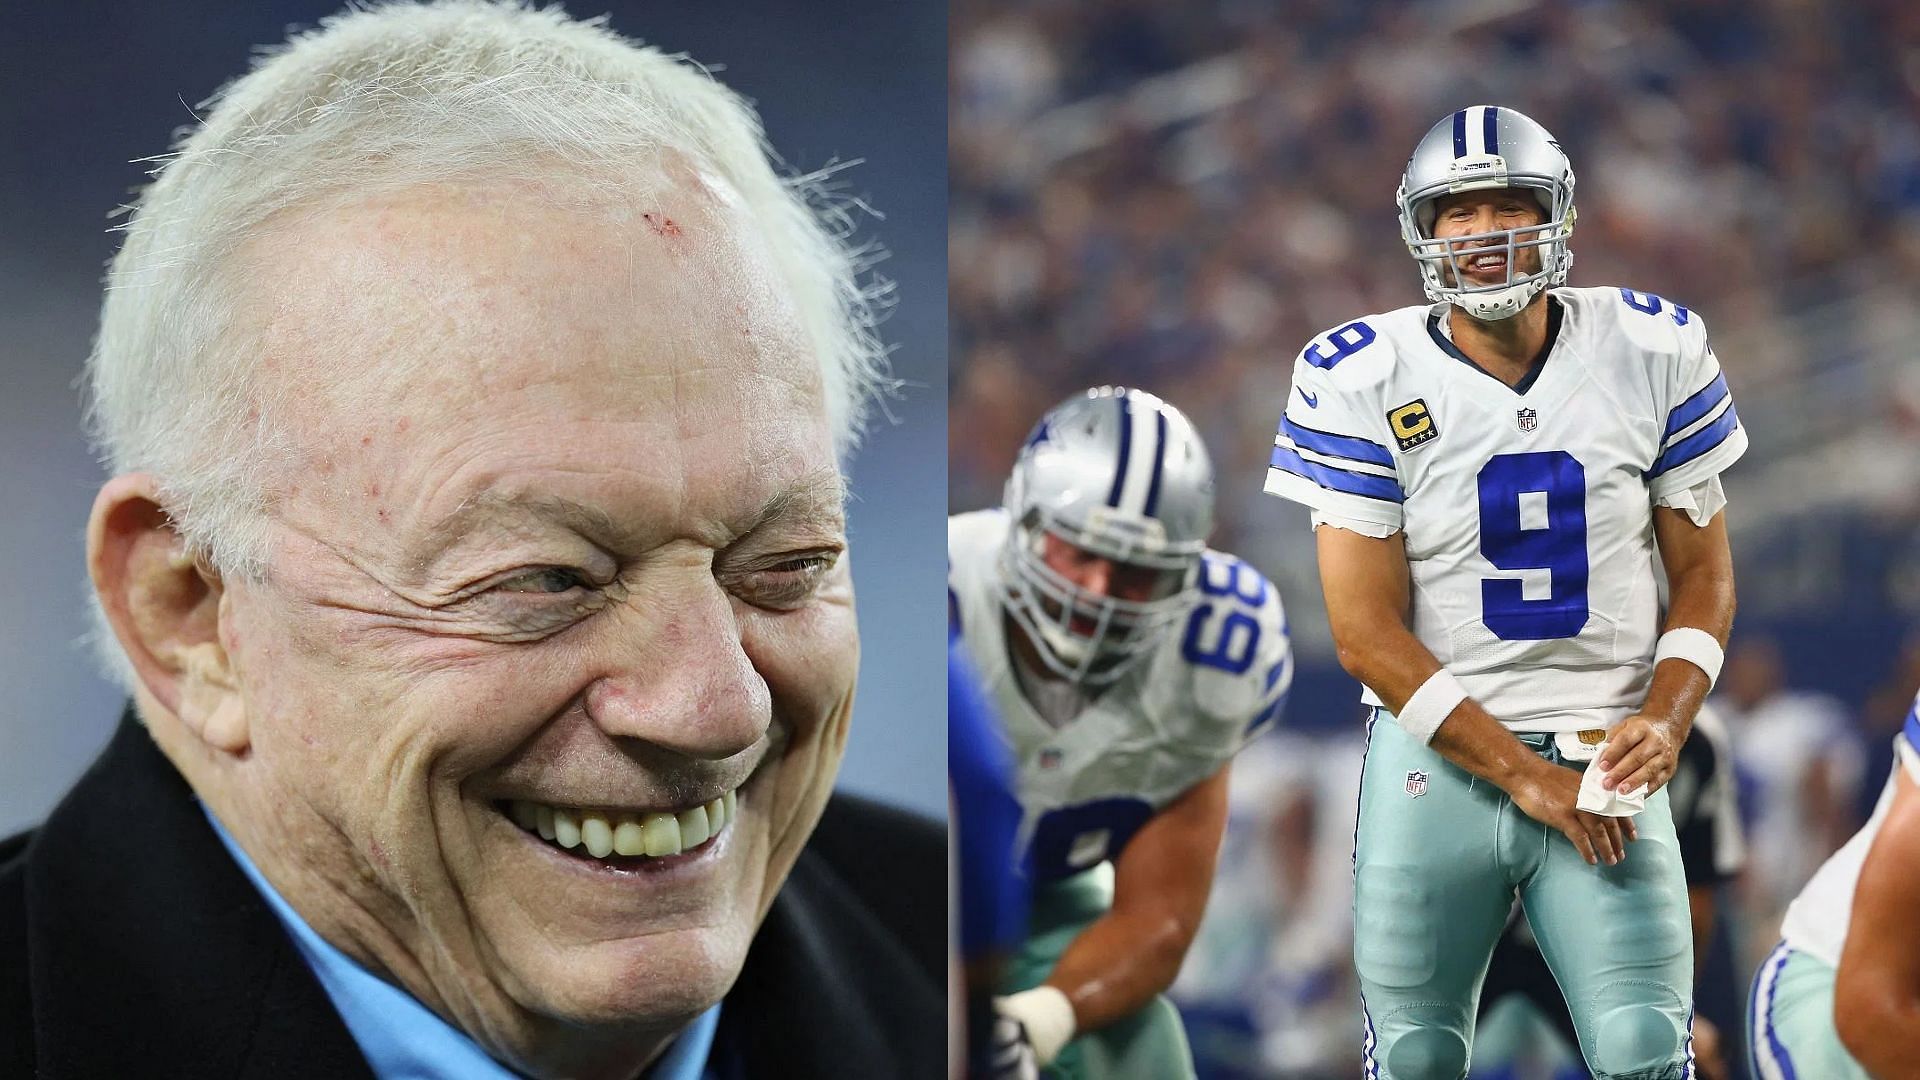 Romo revealed his contract negotiation talk with Jerry Jones was tough.